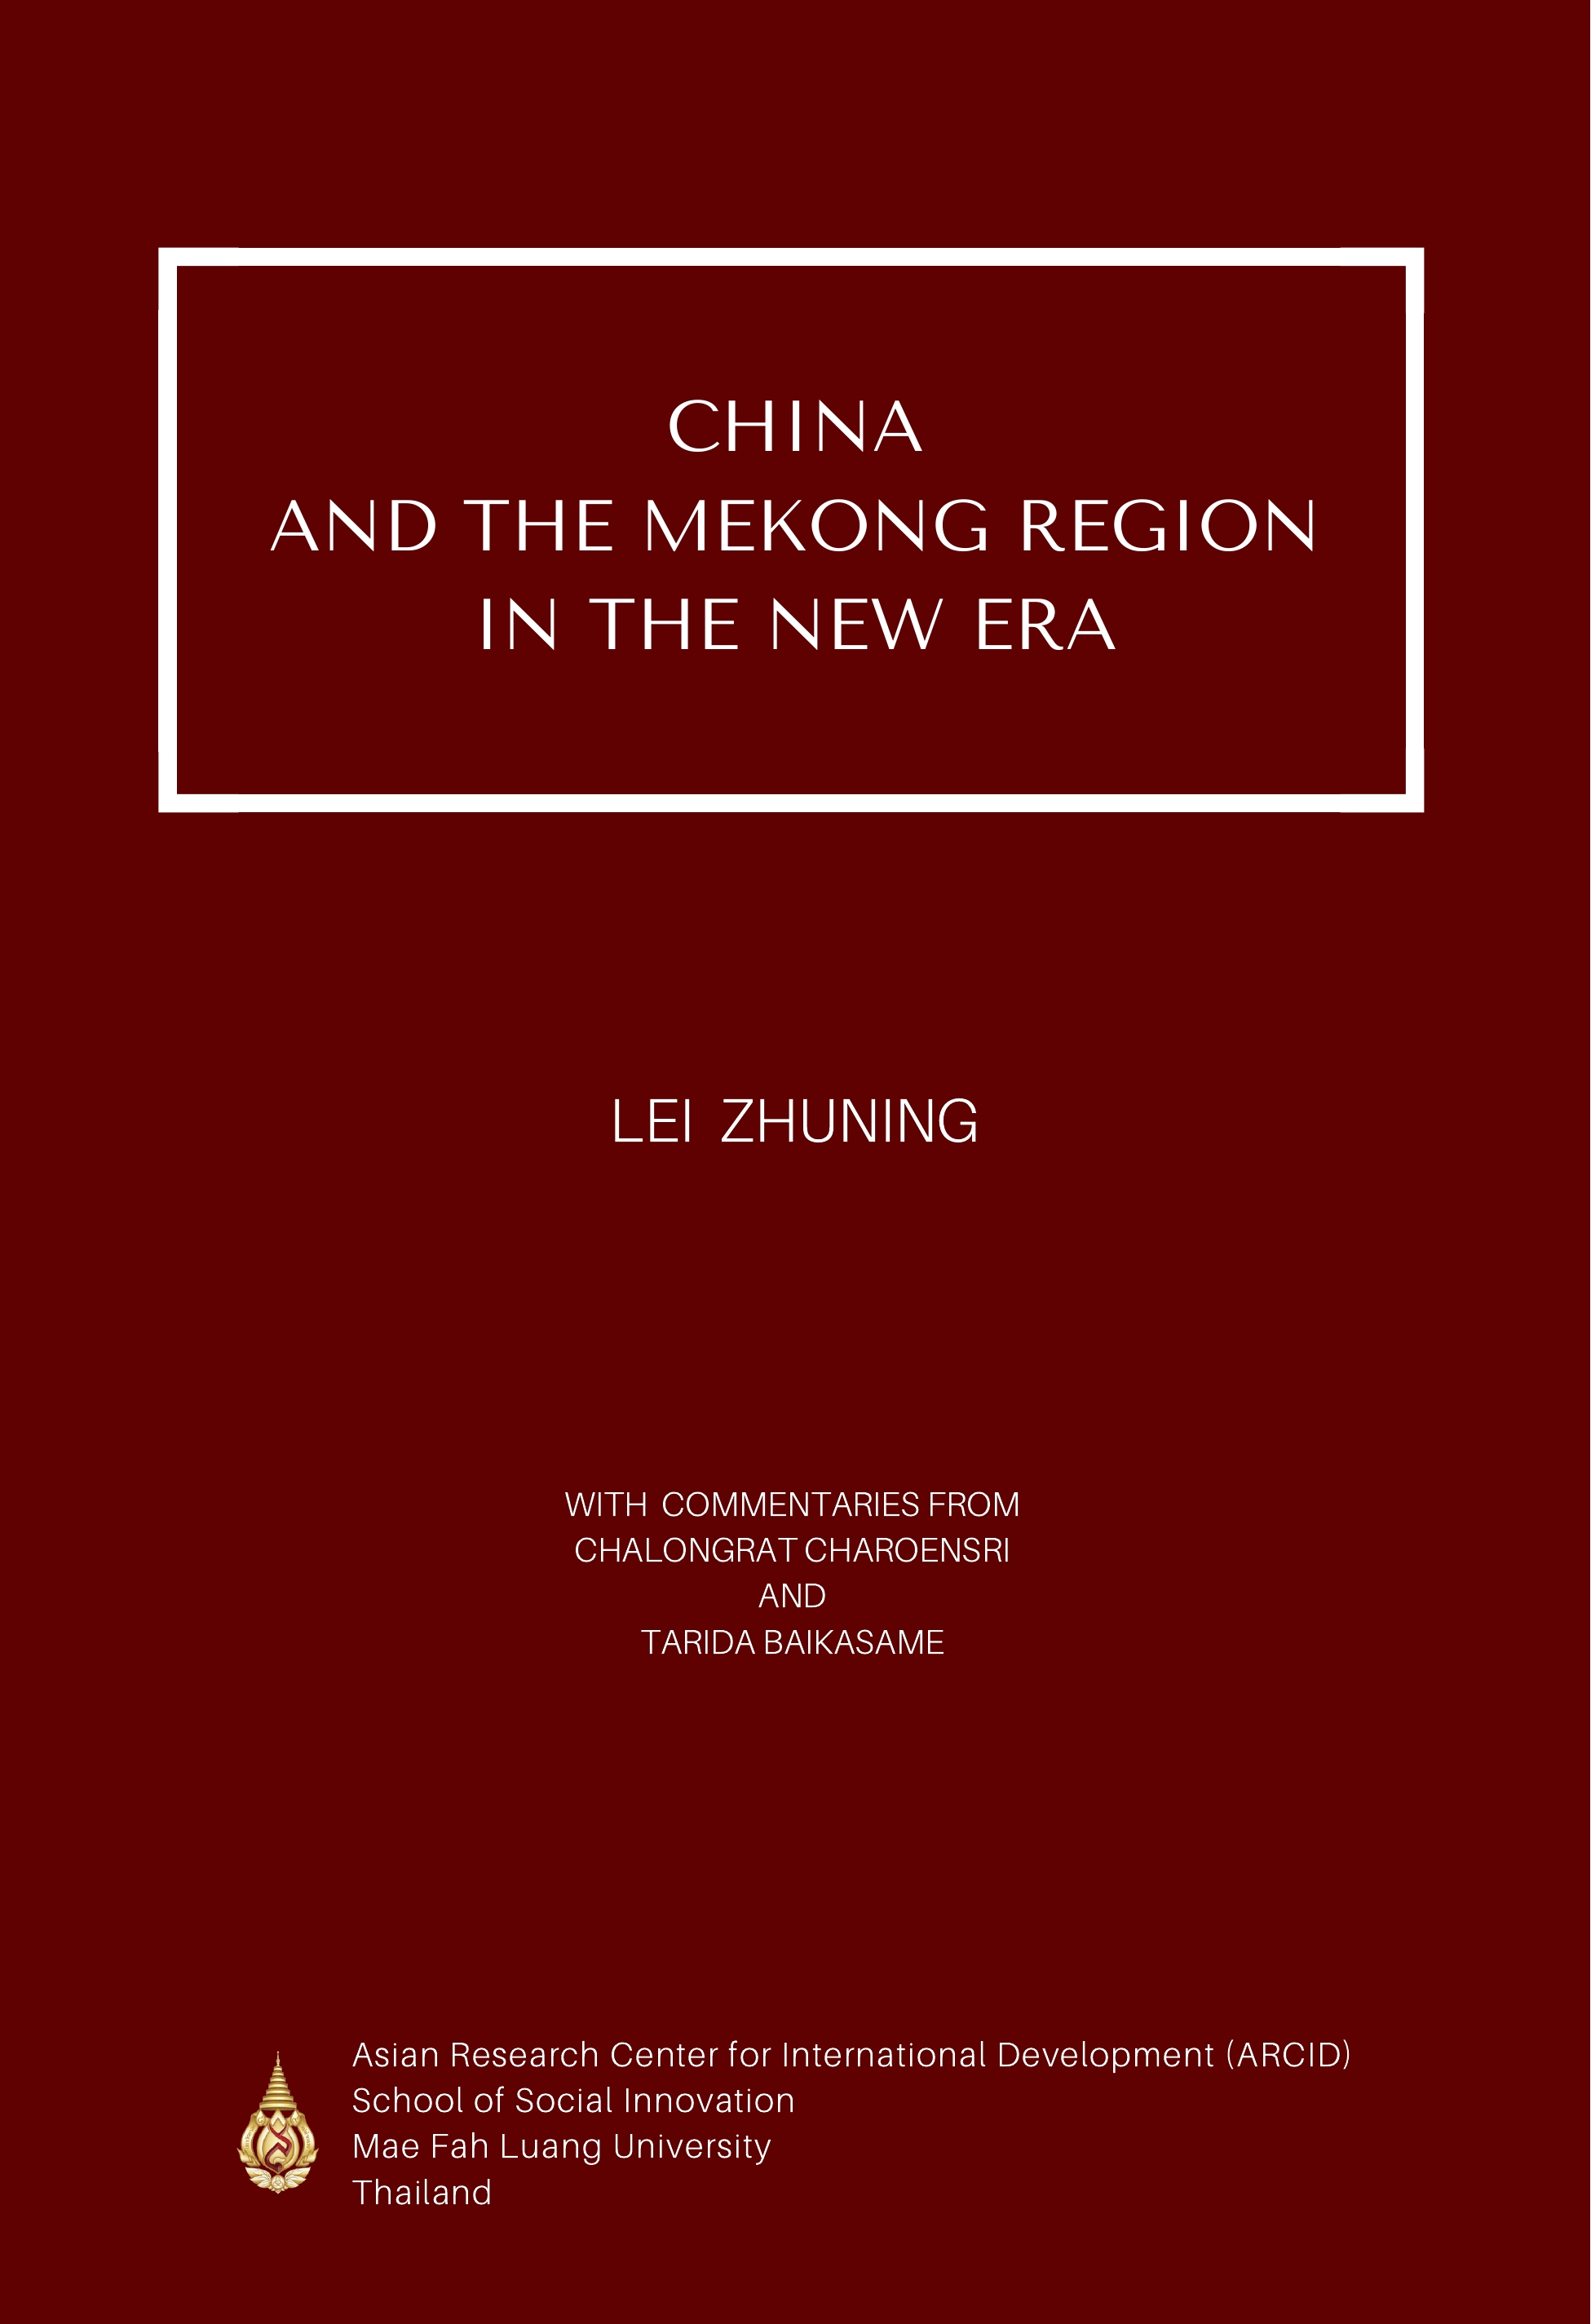 CHINA AND THE MEKONG REGION IN THE NEW ERA